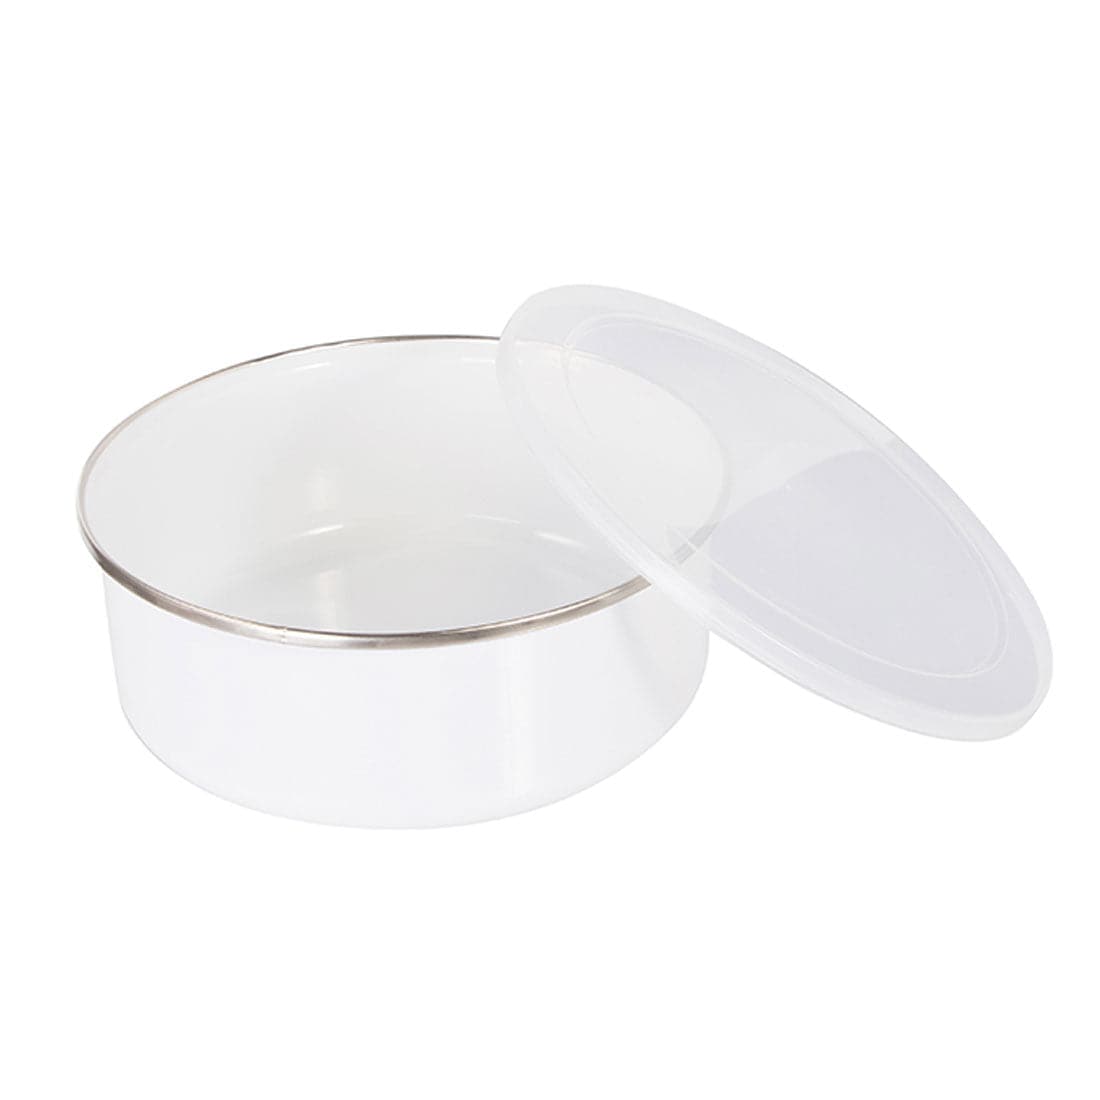 Pearl Coating™ Sublimation Enamel Bowl - Pack of 8 - Joto Imaging Supplies US